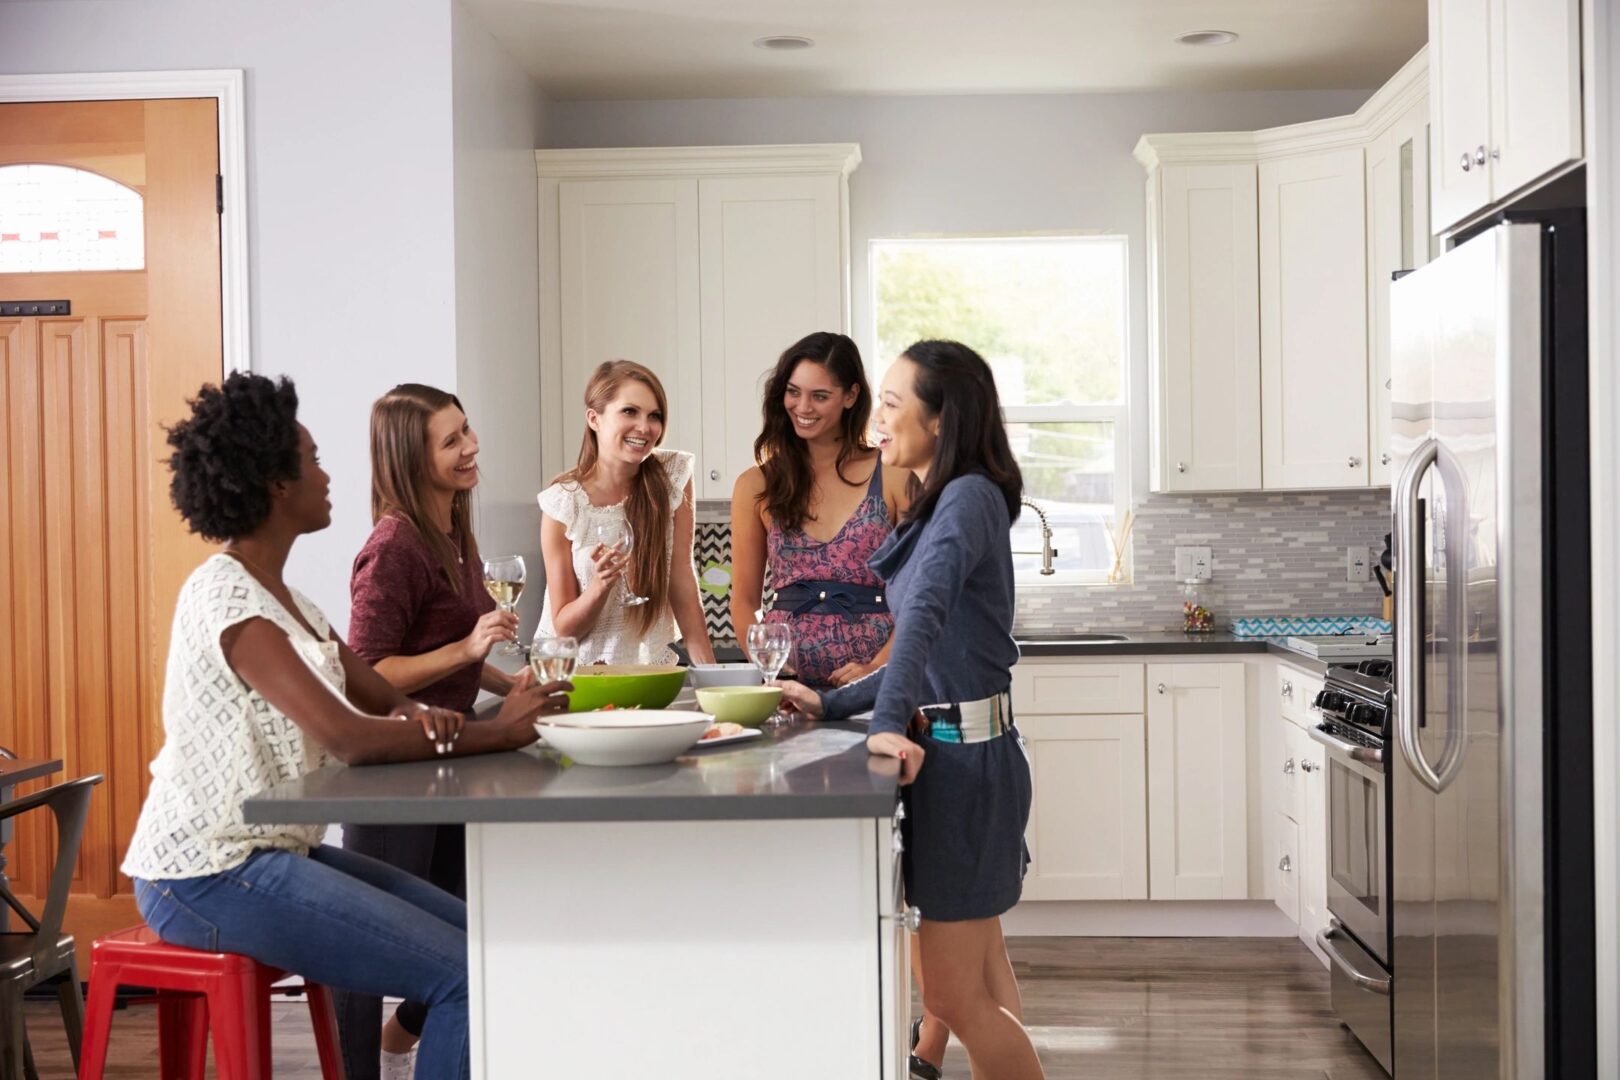 A group of women in the kitchen talking to each other.